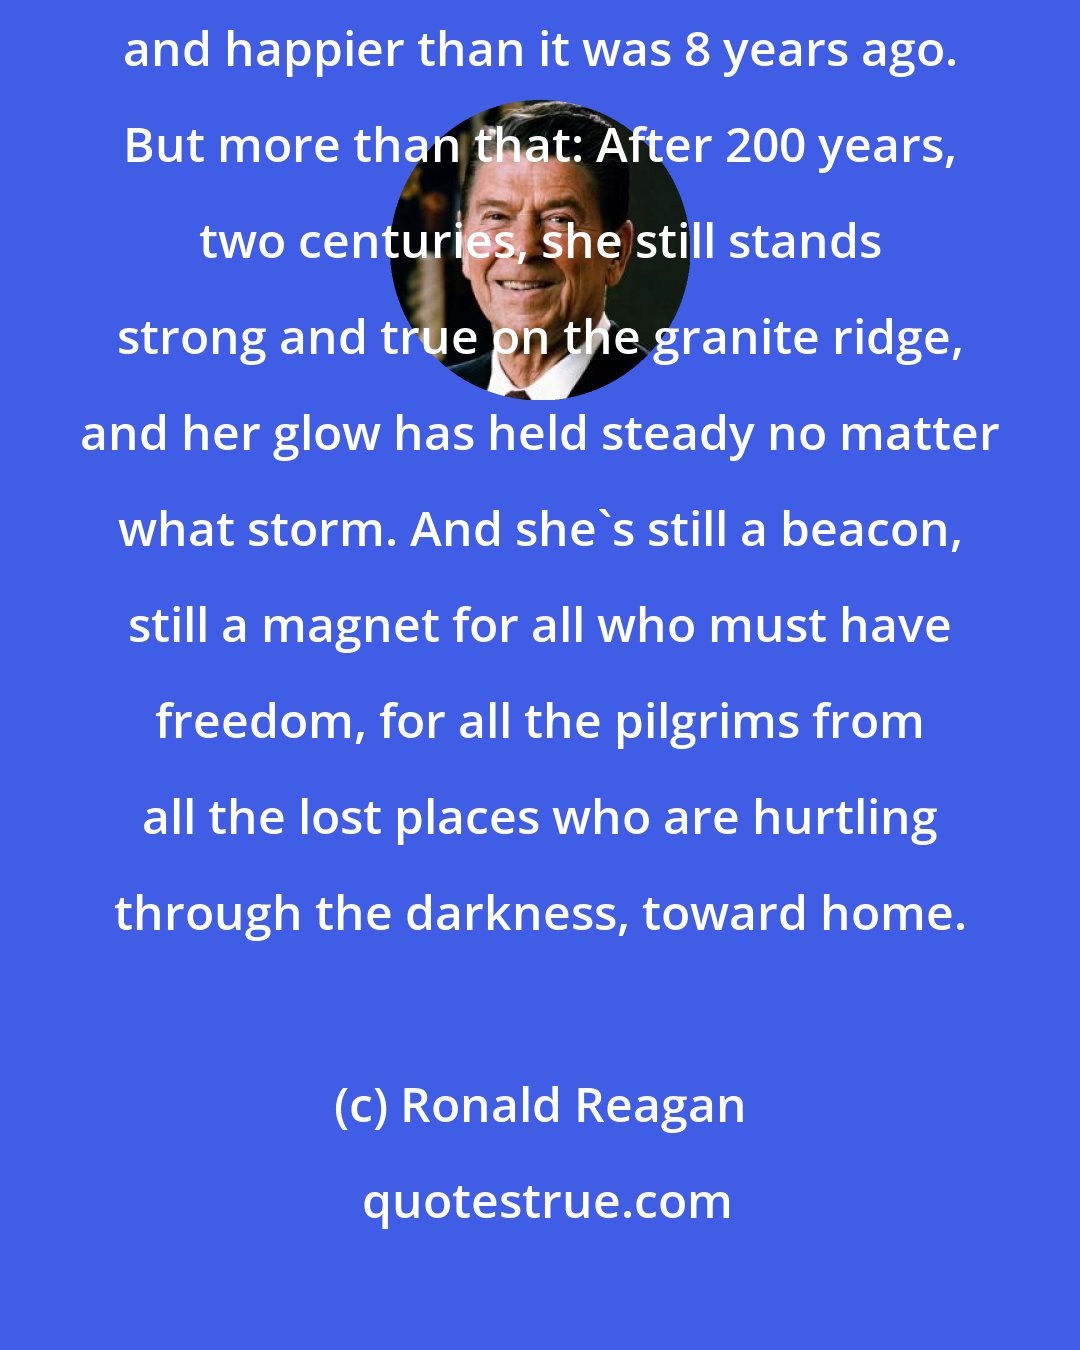 Ronald Reagan: And how stands the city on this winter night? More prosperous, more secure, and happier than it was 8 years ago. But more than that: After 200 years, two centuries, she still stands strong and true on the granite ridge, and her glow has held steady no matter what storm. And she's still a beacon, still a magnet for all who must have freedom, for all the pilgrims from all the lost places who are hurtling through the darkness, toward home.